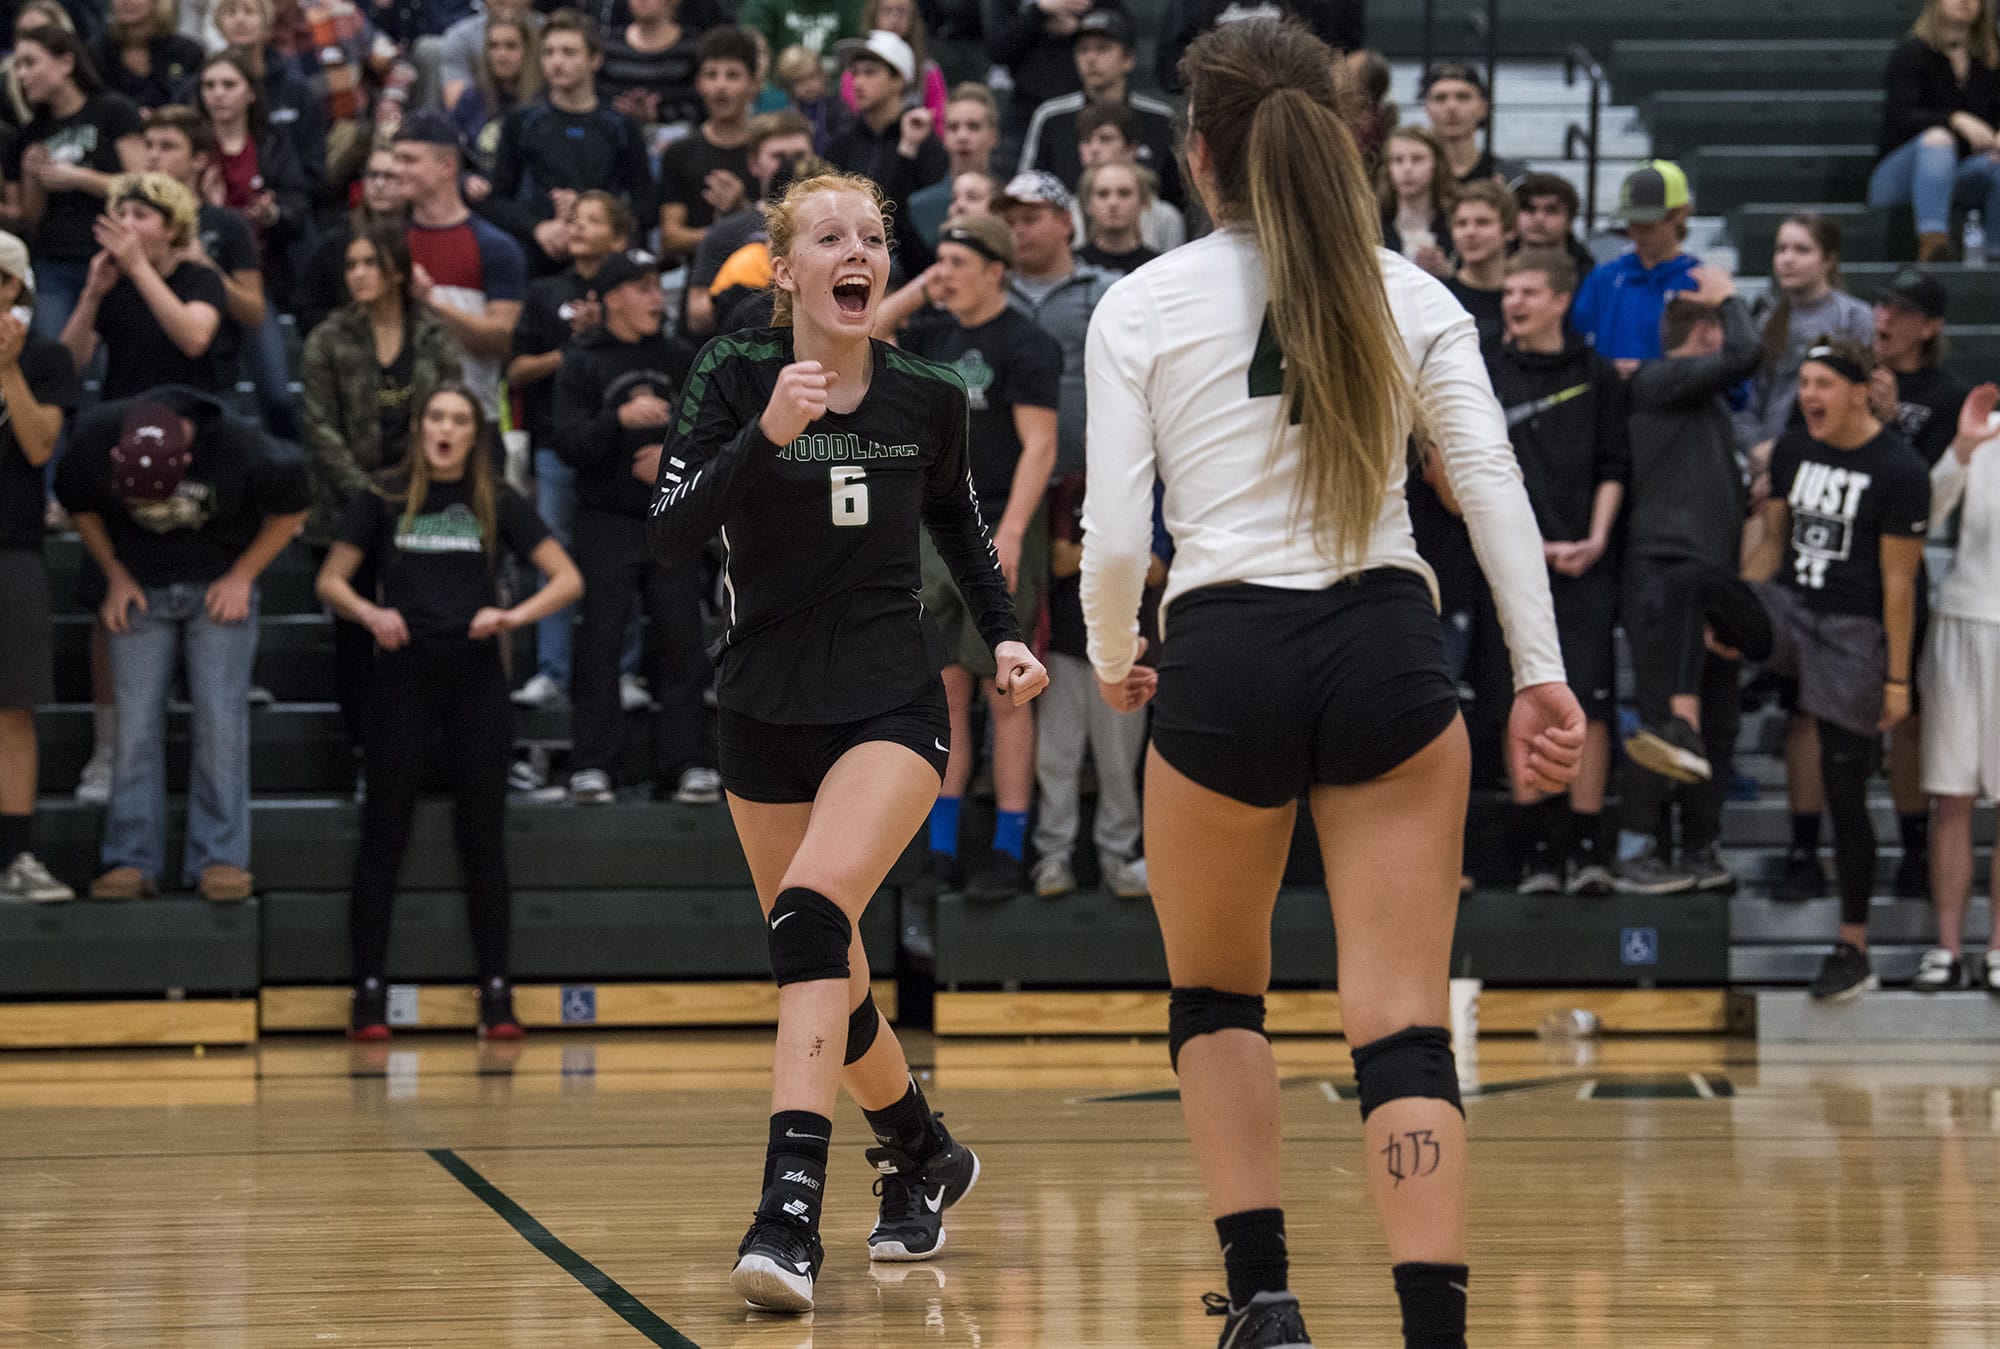 Woodland's Emma Swett (6) celebrates a point during the match at Woodland High School on Tuesday evening, Oct. 17, 2017. Woodland won the match 3-1.